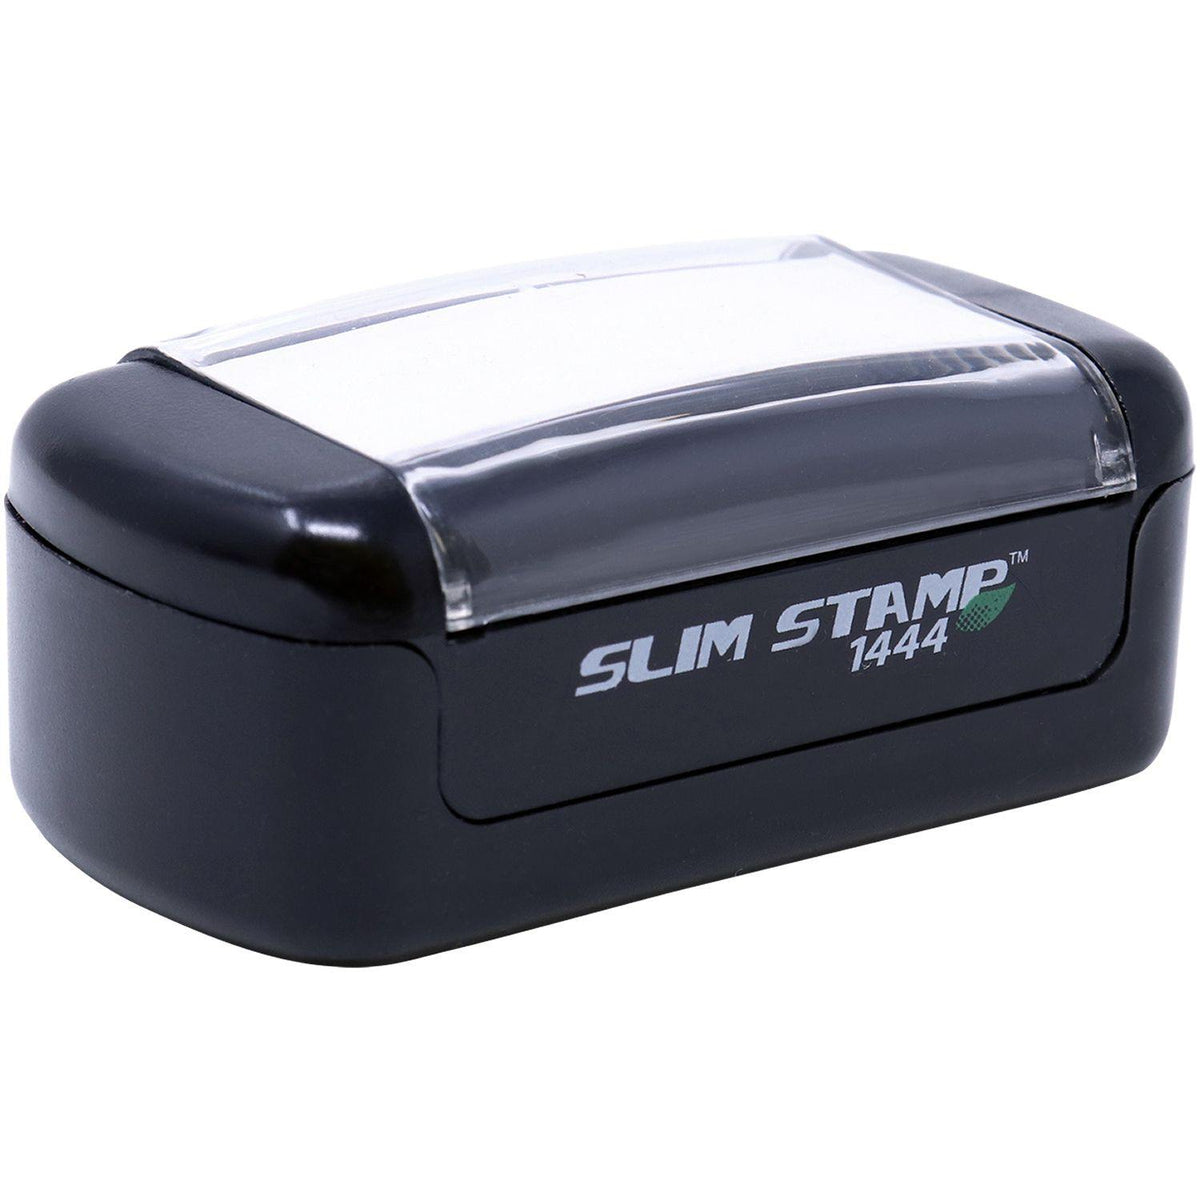 Alt View of Slim Pre Inked Corrected Stamp Mount Angle